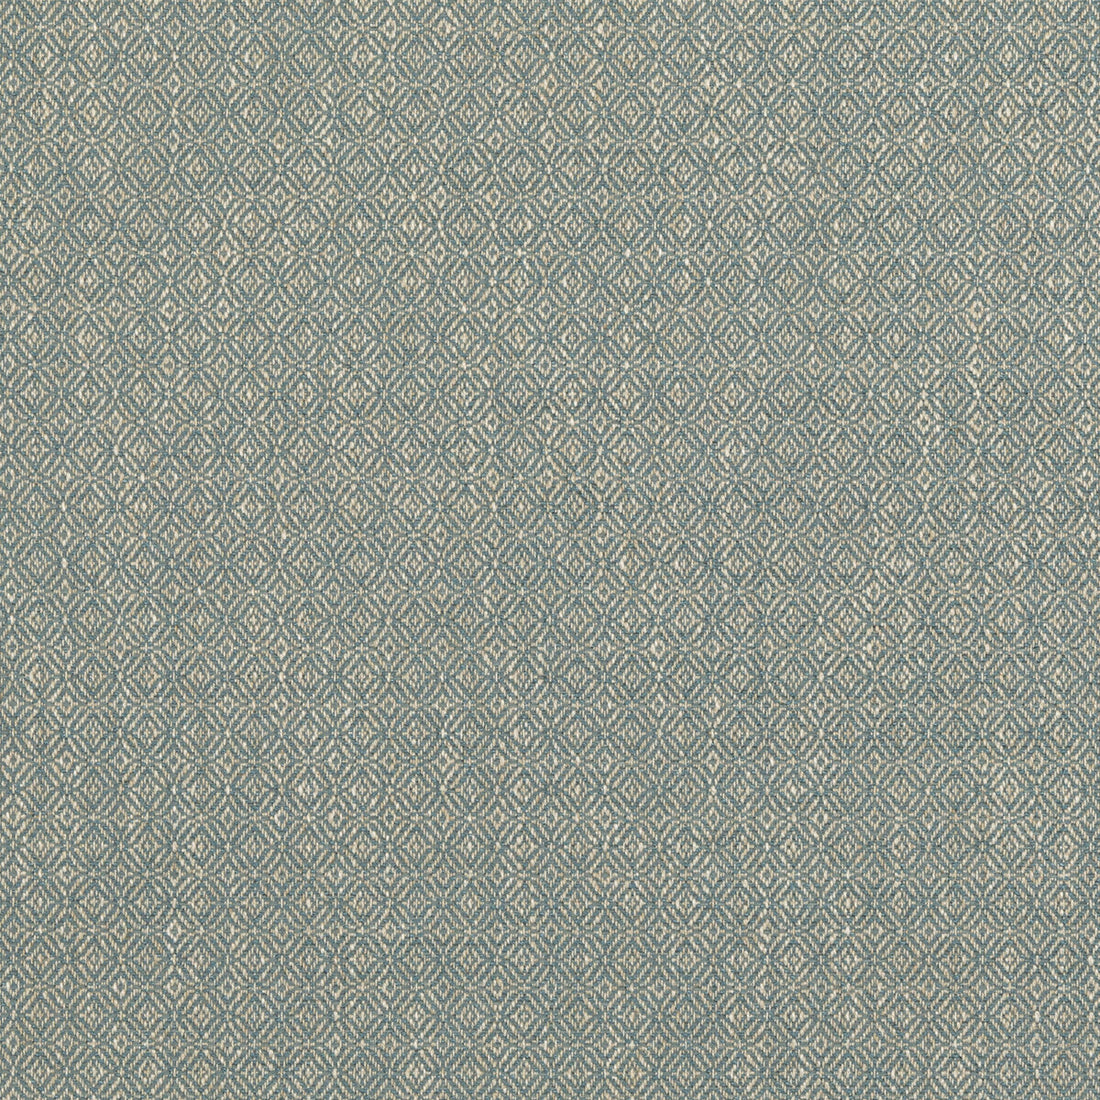 Kenton fabric in soft blue color - pattern BF10868.605.0 - by G P &amp; J Baker in the Essential Colours II collection